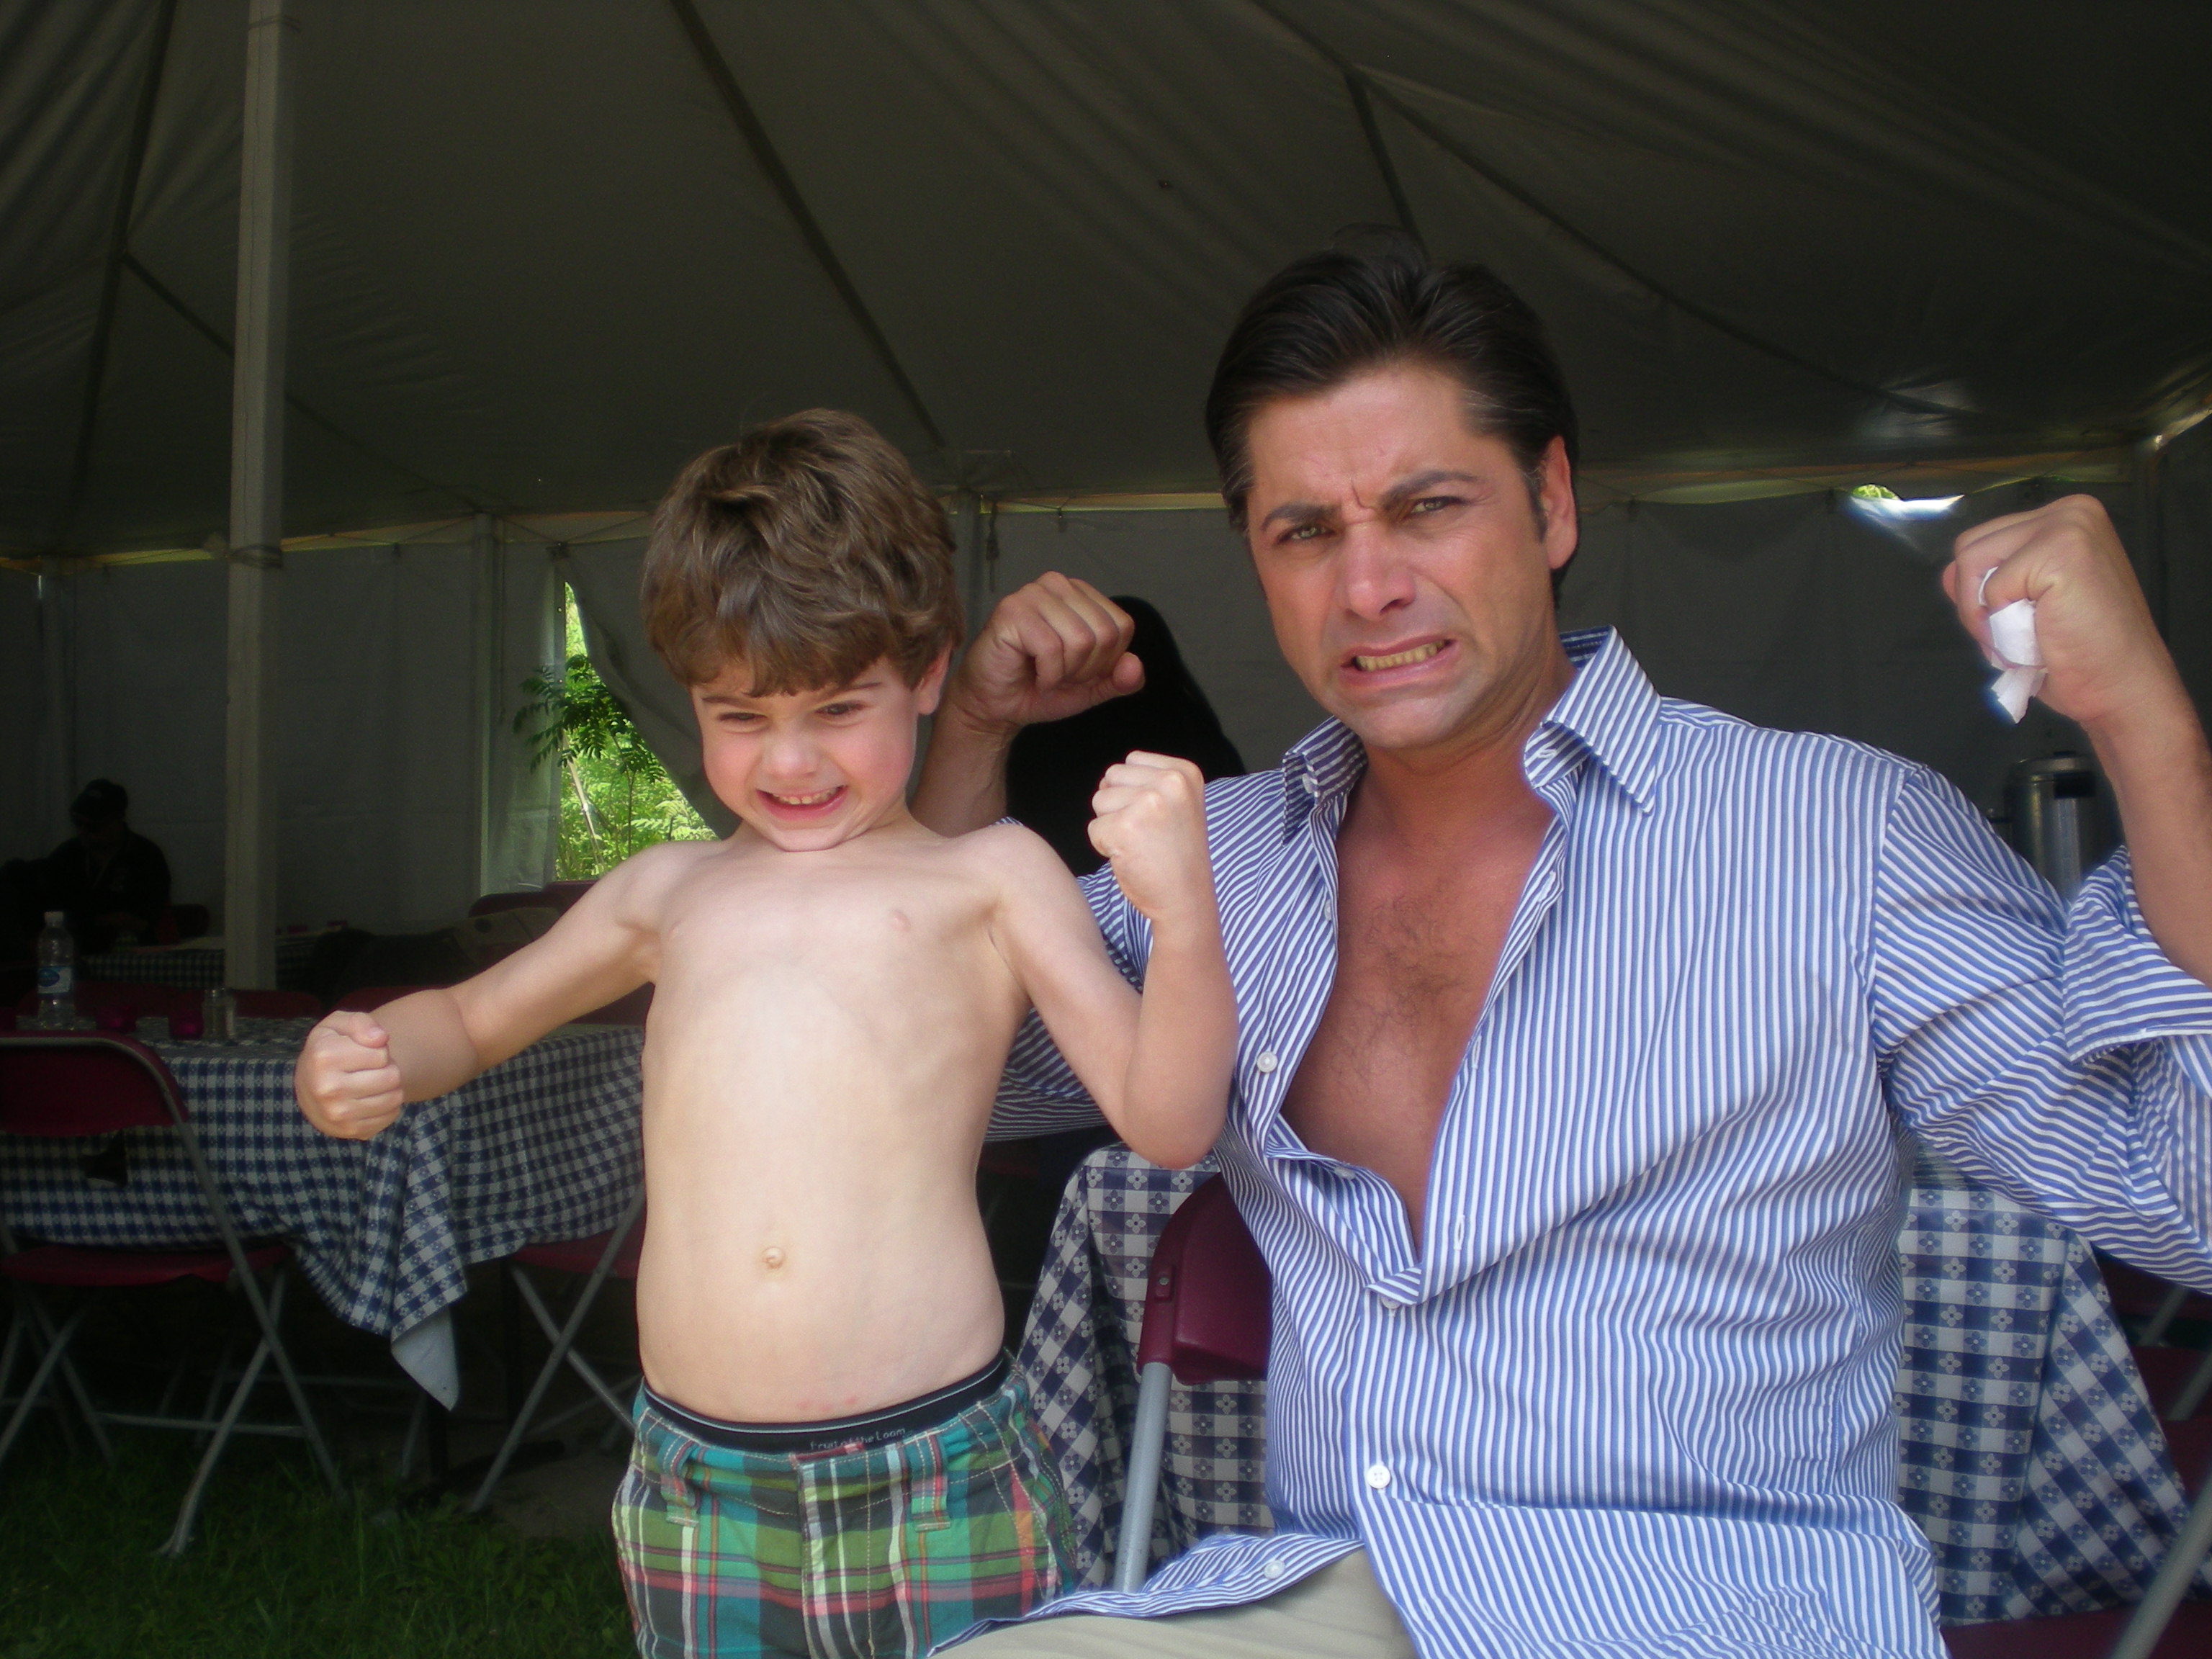 Jake Goodman and John Stamos on the set of The Two Mr. Kissels/2008